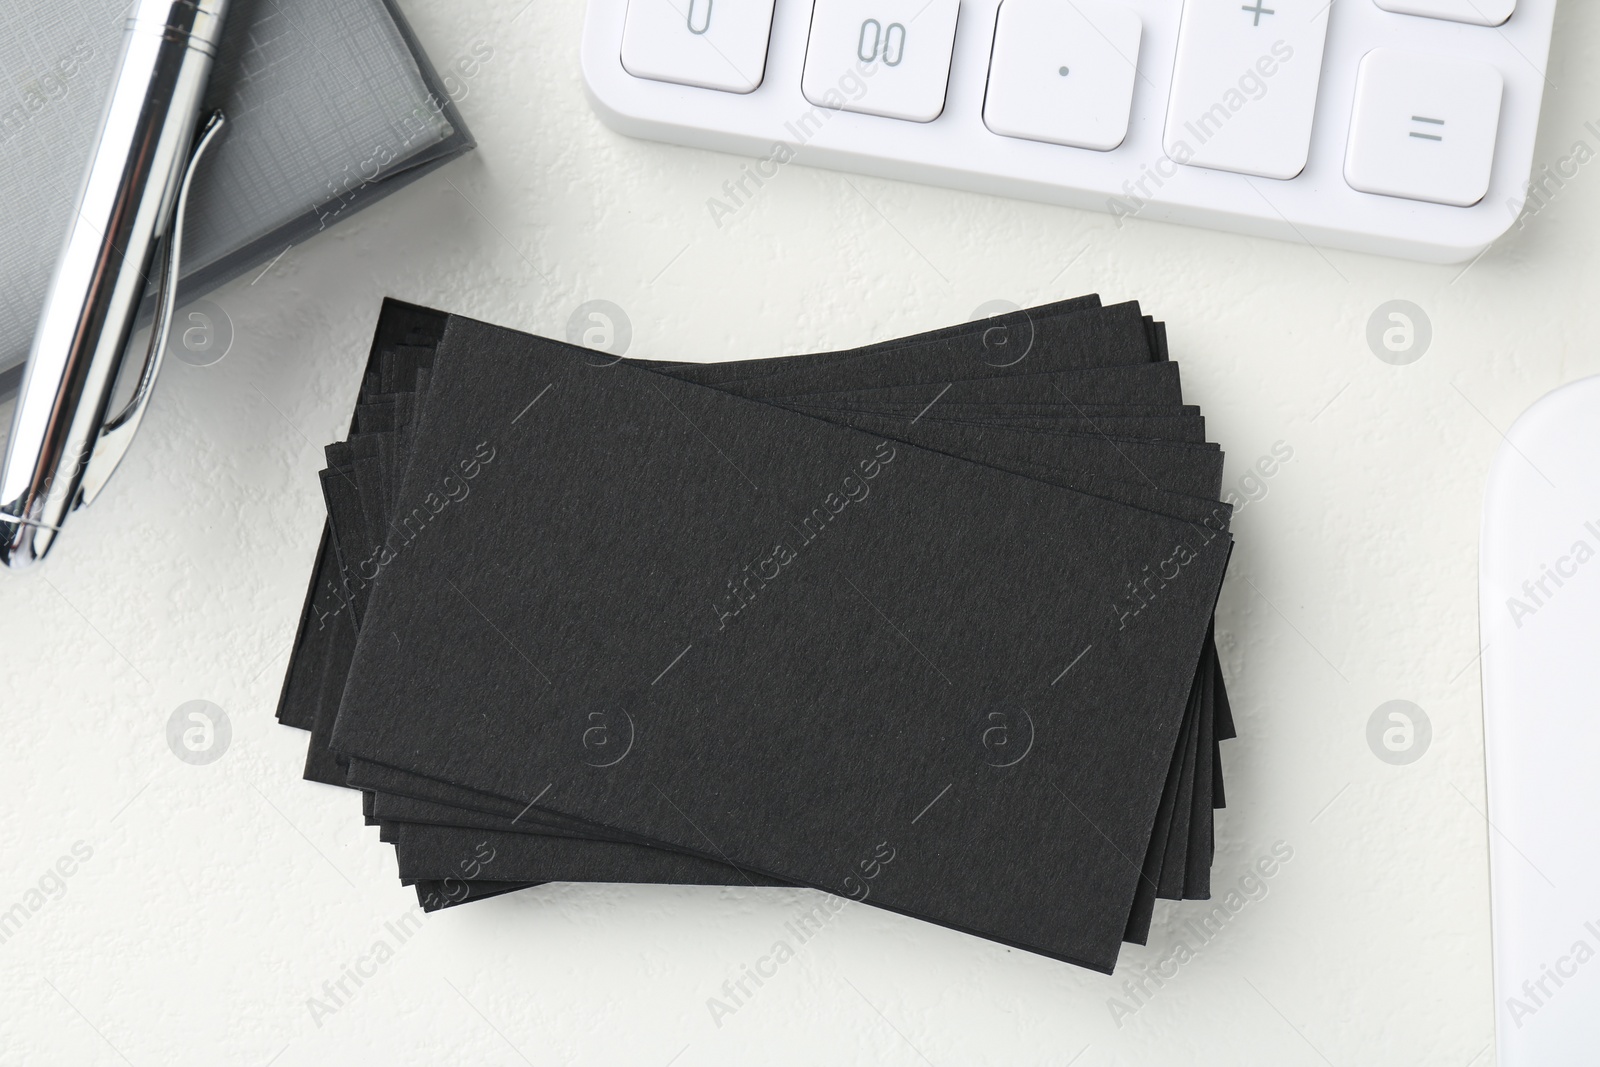 Photo of Blank black business cards, calculator, pen and notebook on white table, flat lay. Mockup for design